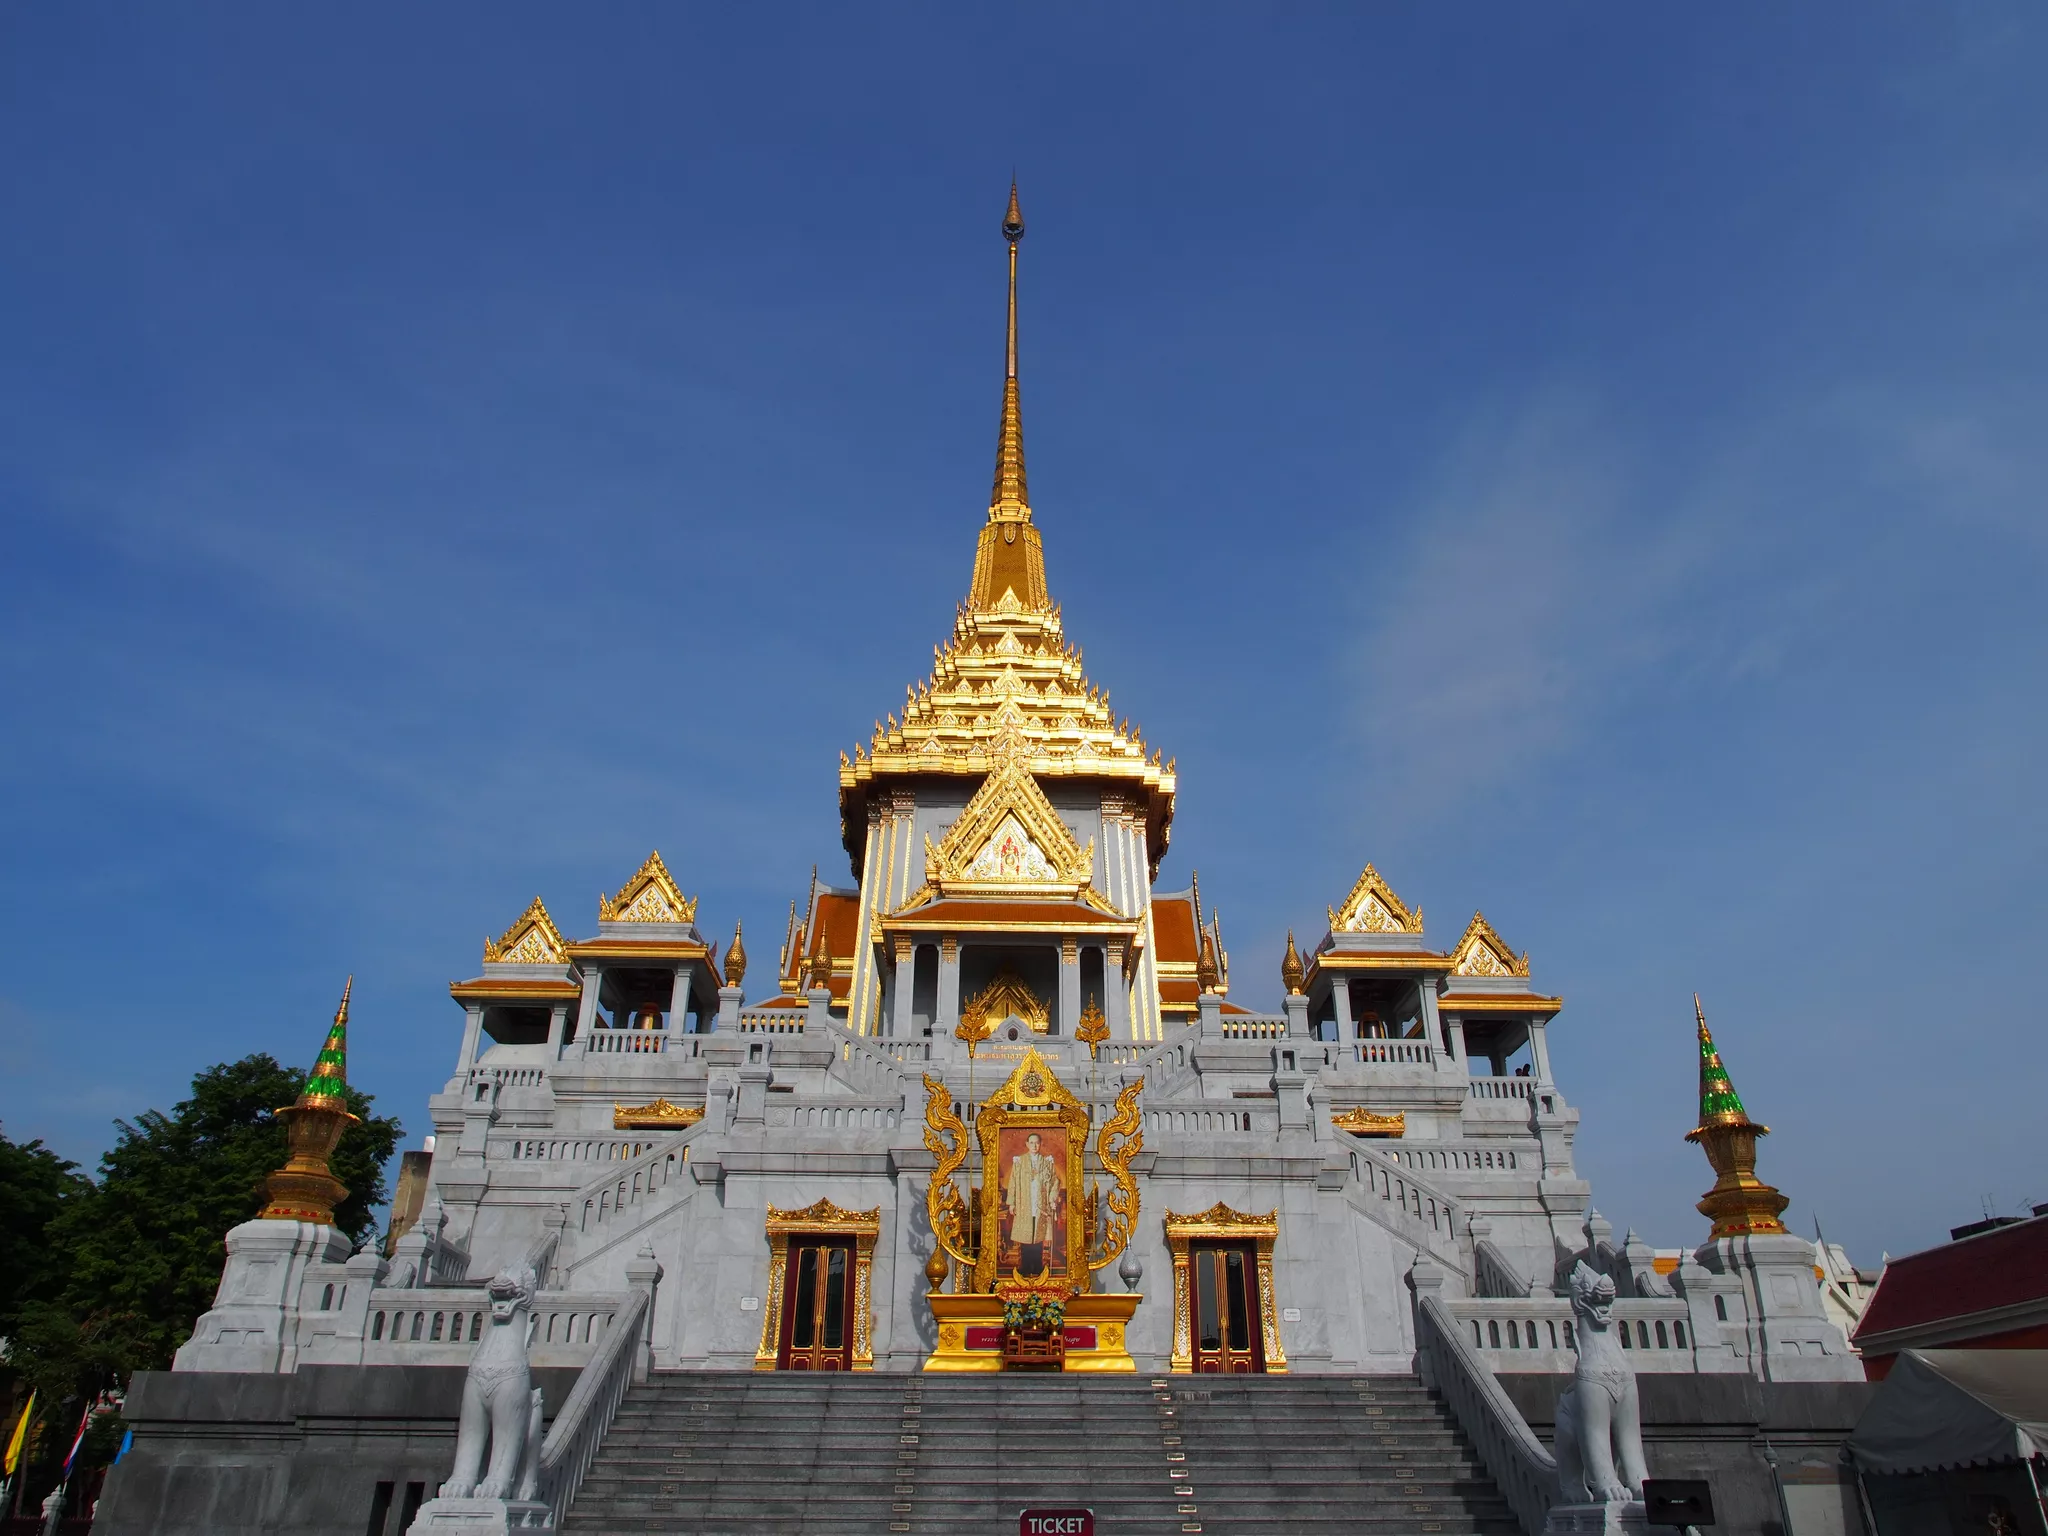 Golden Buddha in Thailand, Central Asia | Architecture,Monuments - Rated 4.5